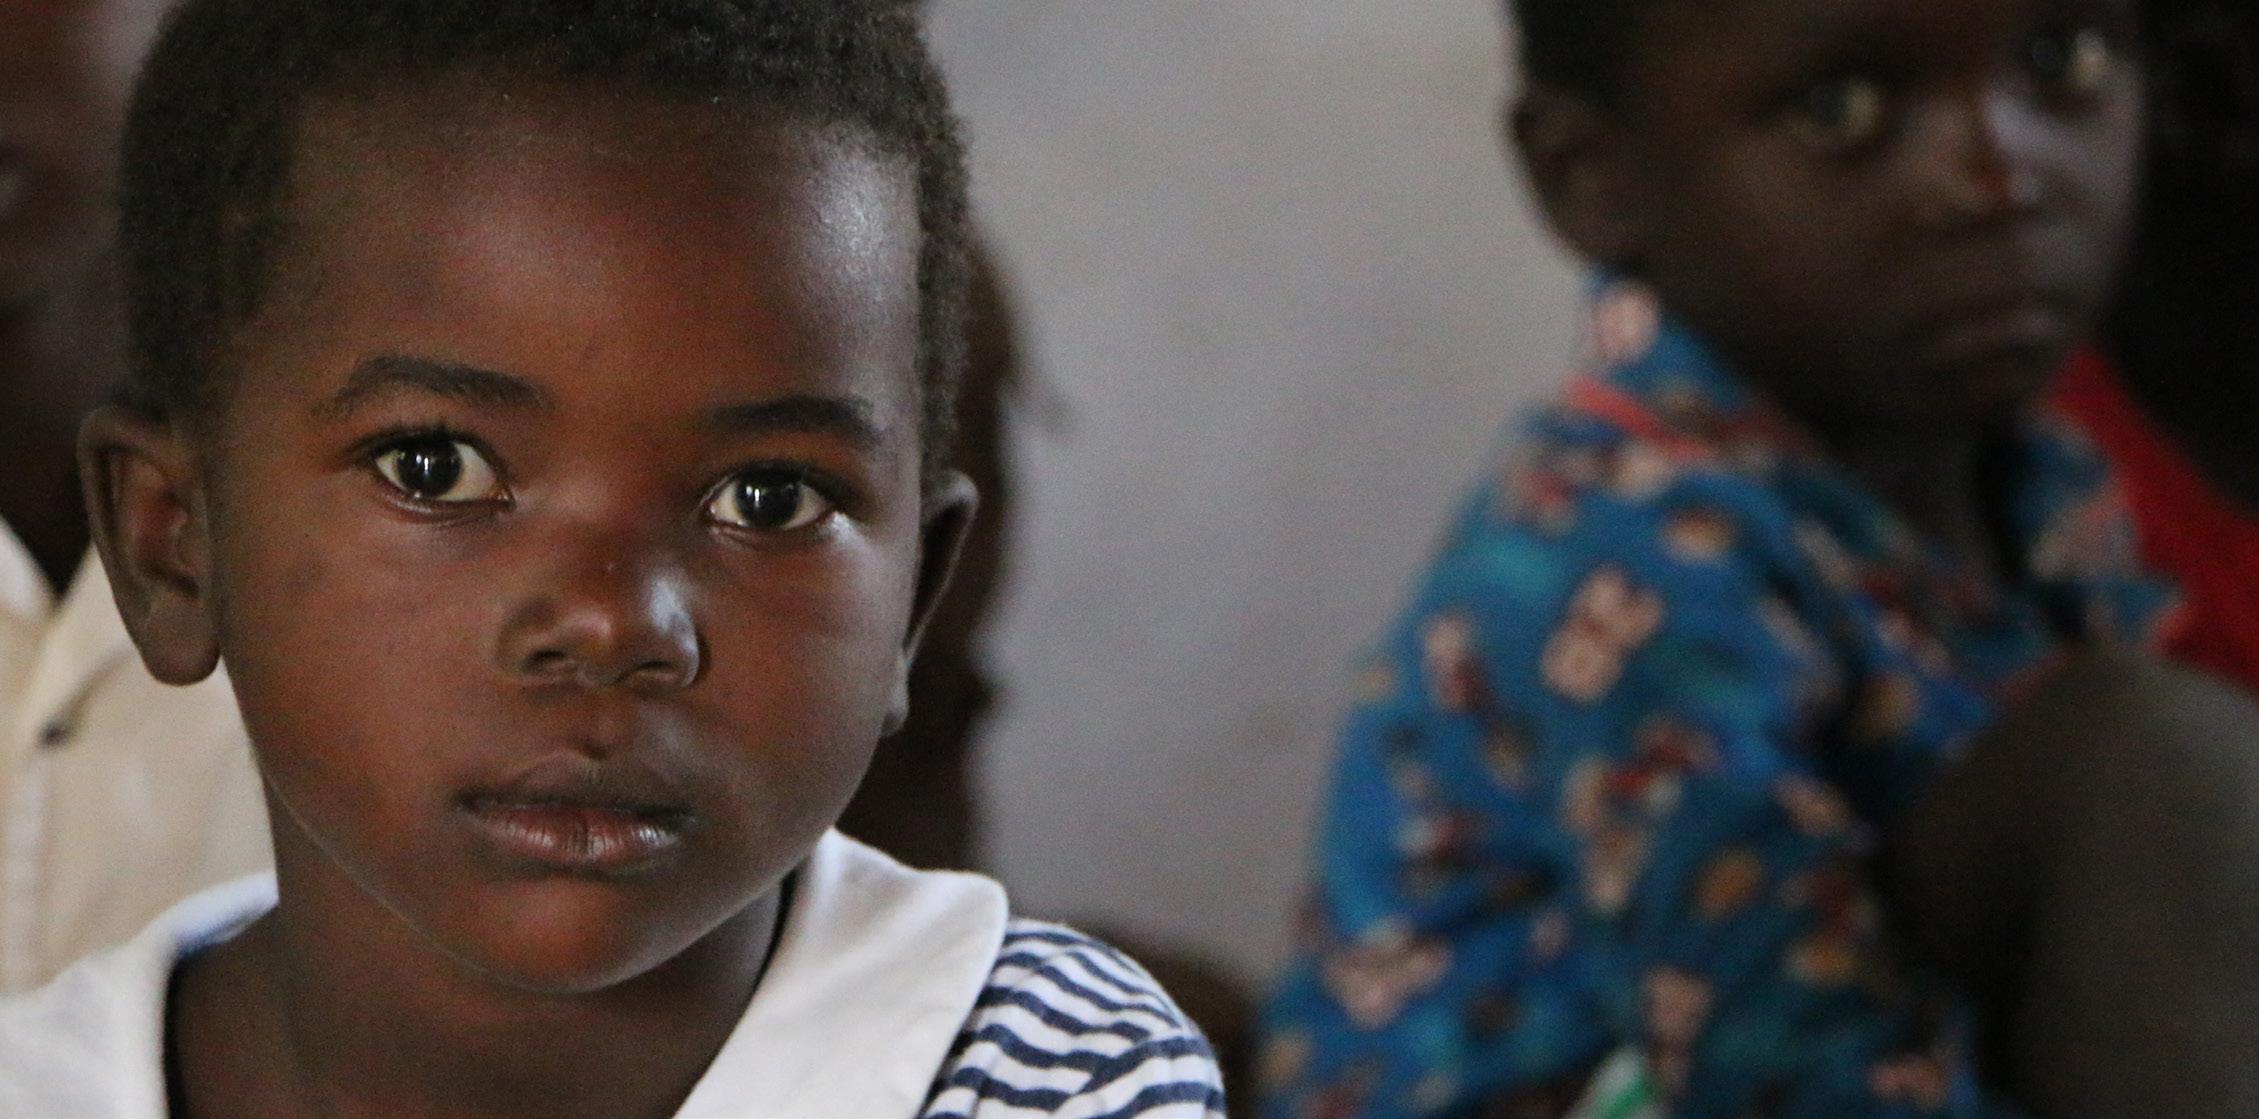 The plight of children in Malawi